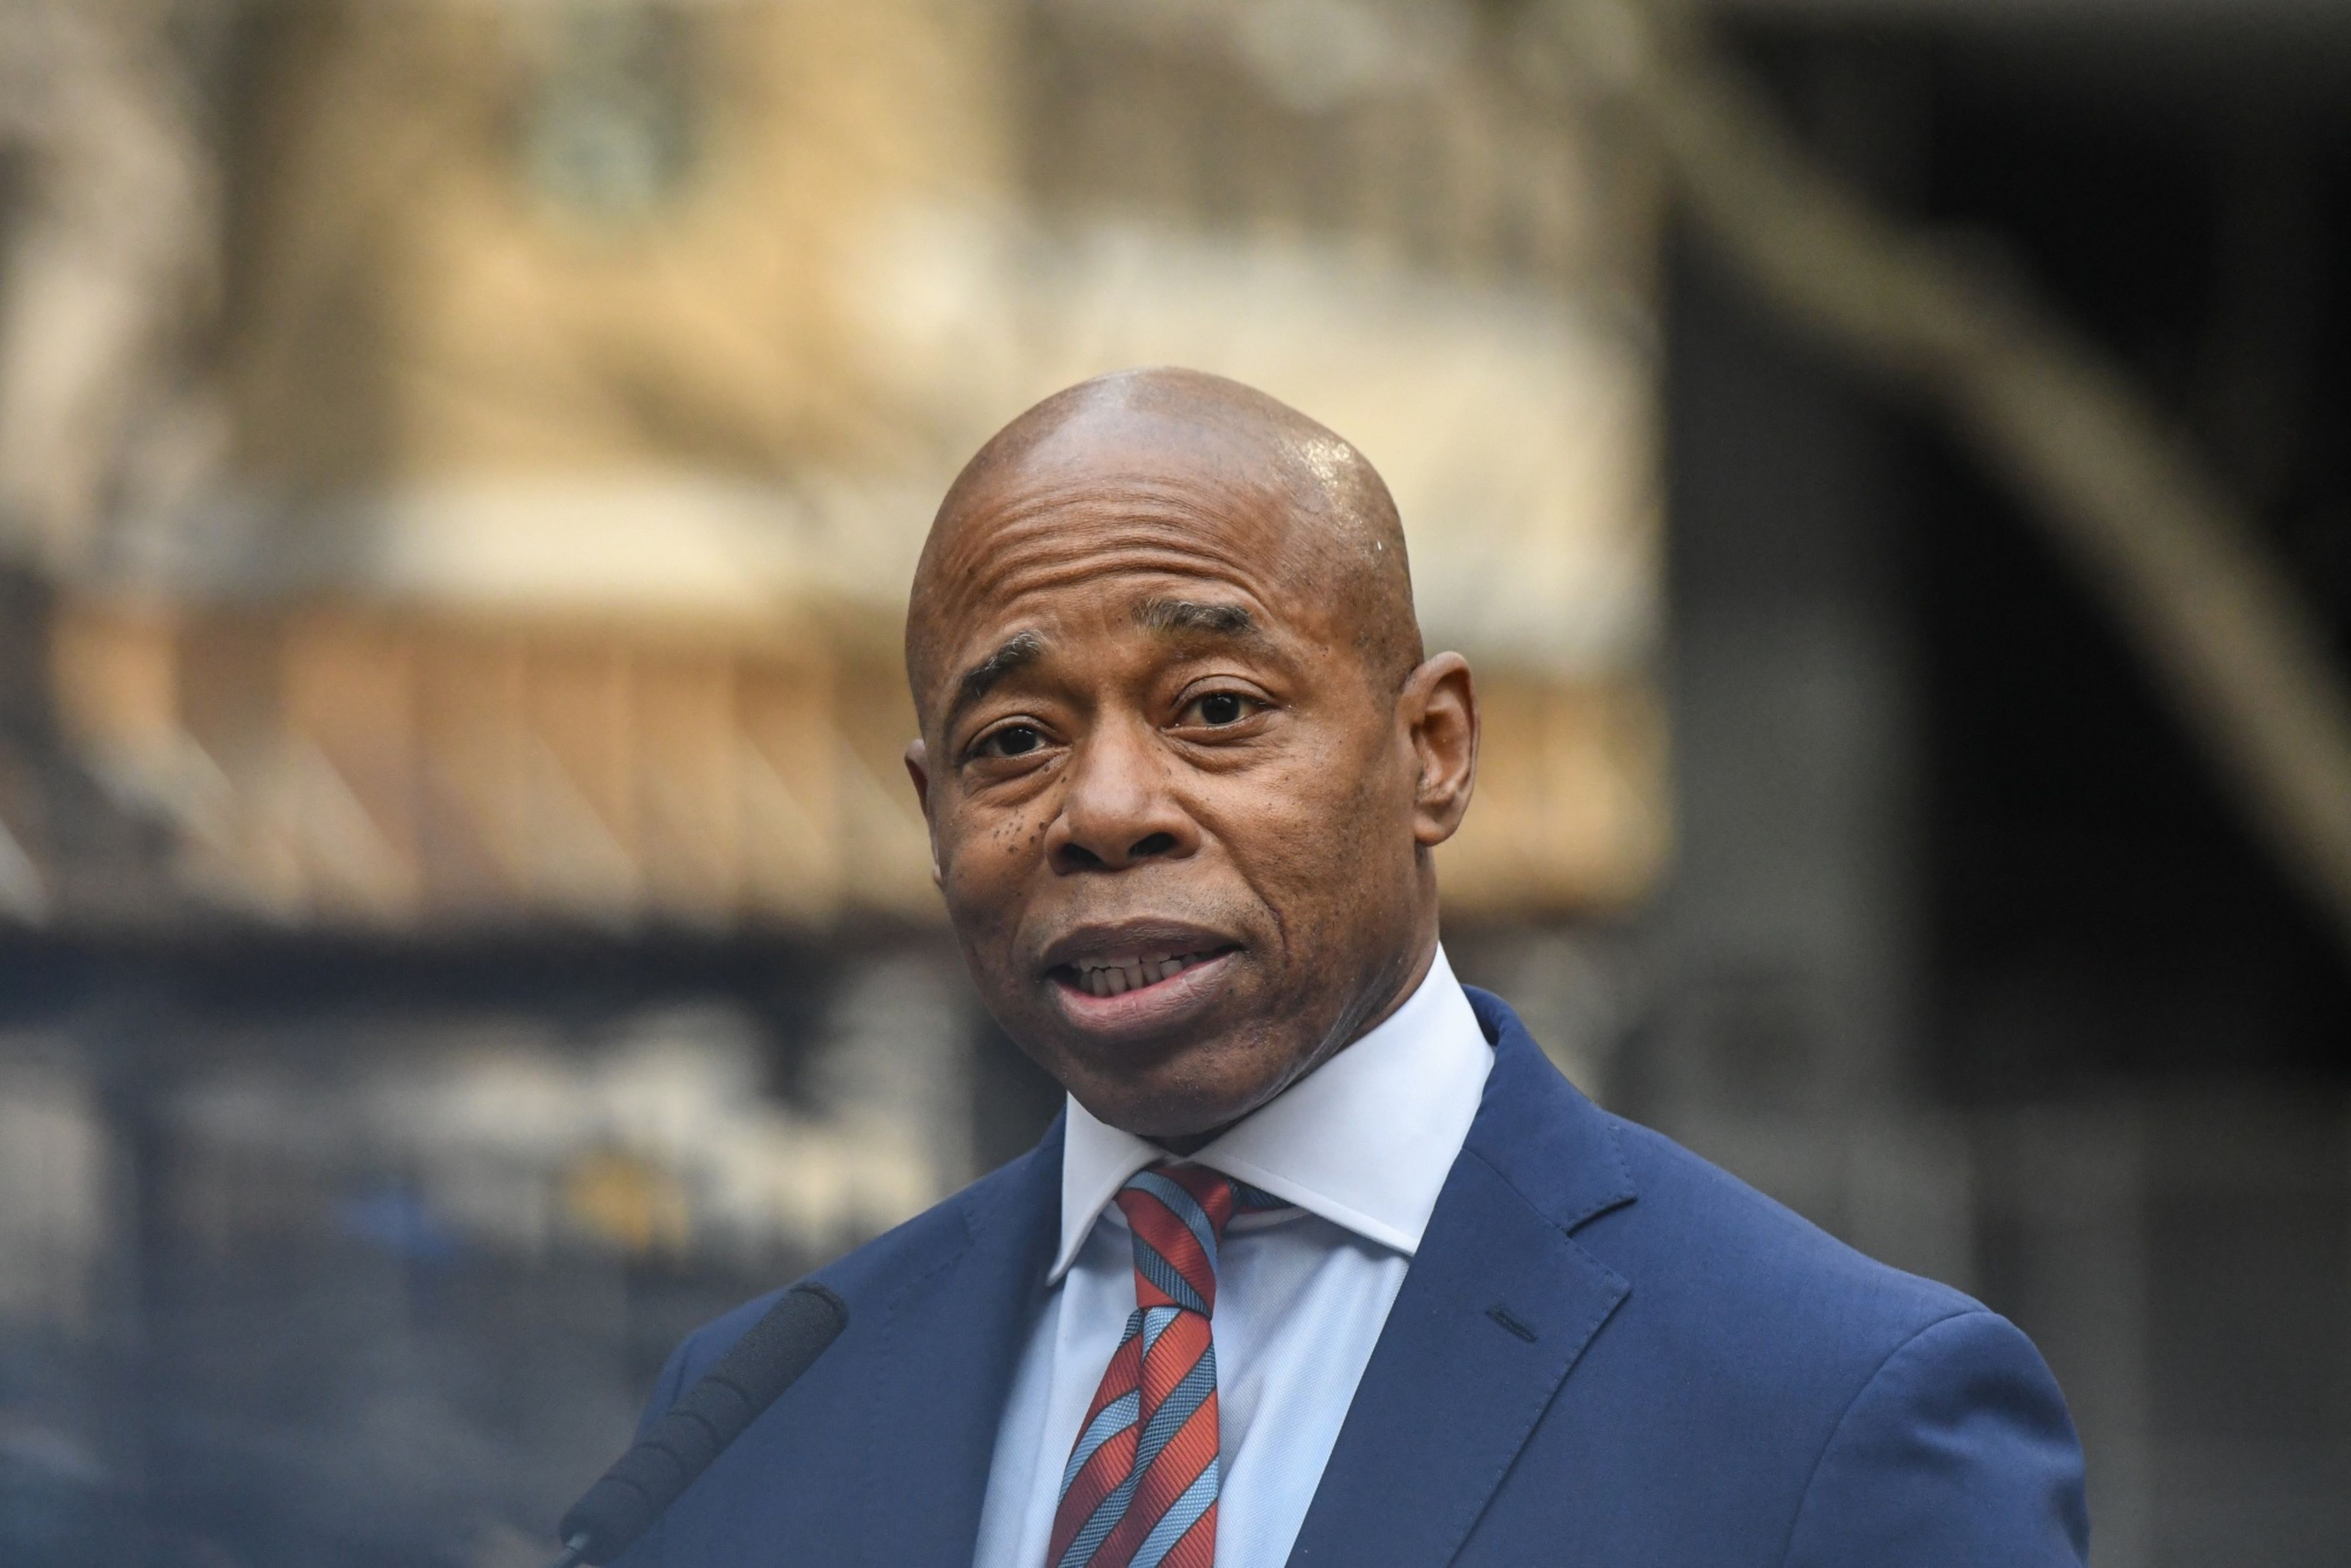 Eric Adams, mayor of New York, speaks during a news conference outside the Manhattan Civil Courthouse in New York, U.S., on Thursday, Jan. 13, 2022. (© 2022 Bloomberg Finance LP)